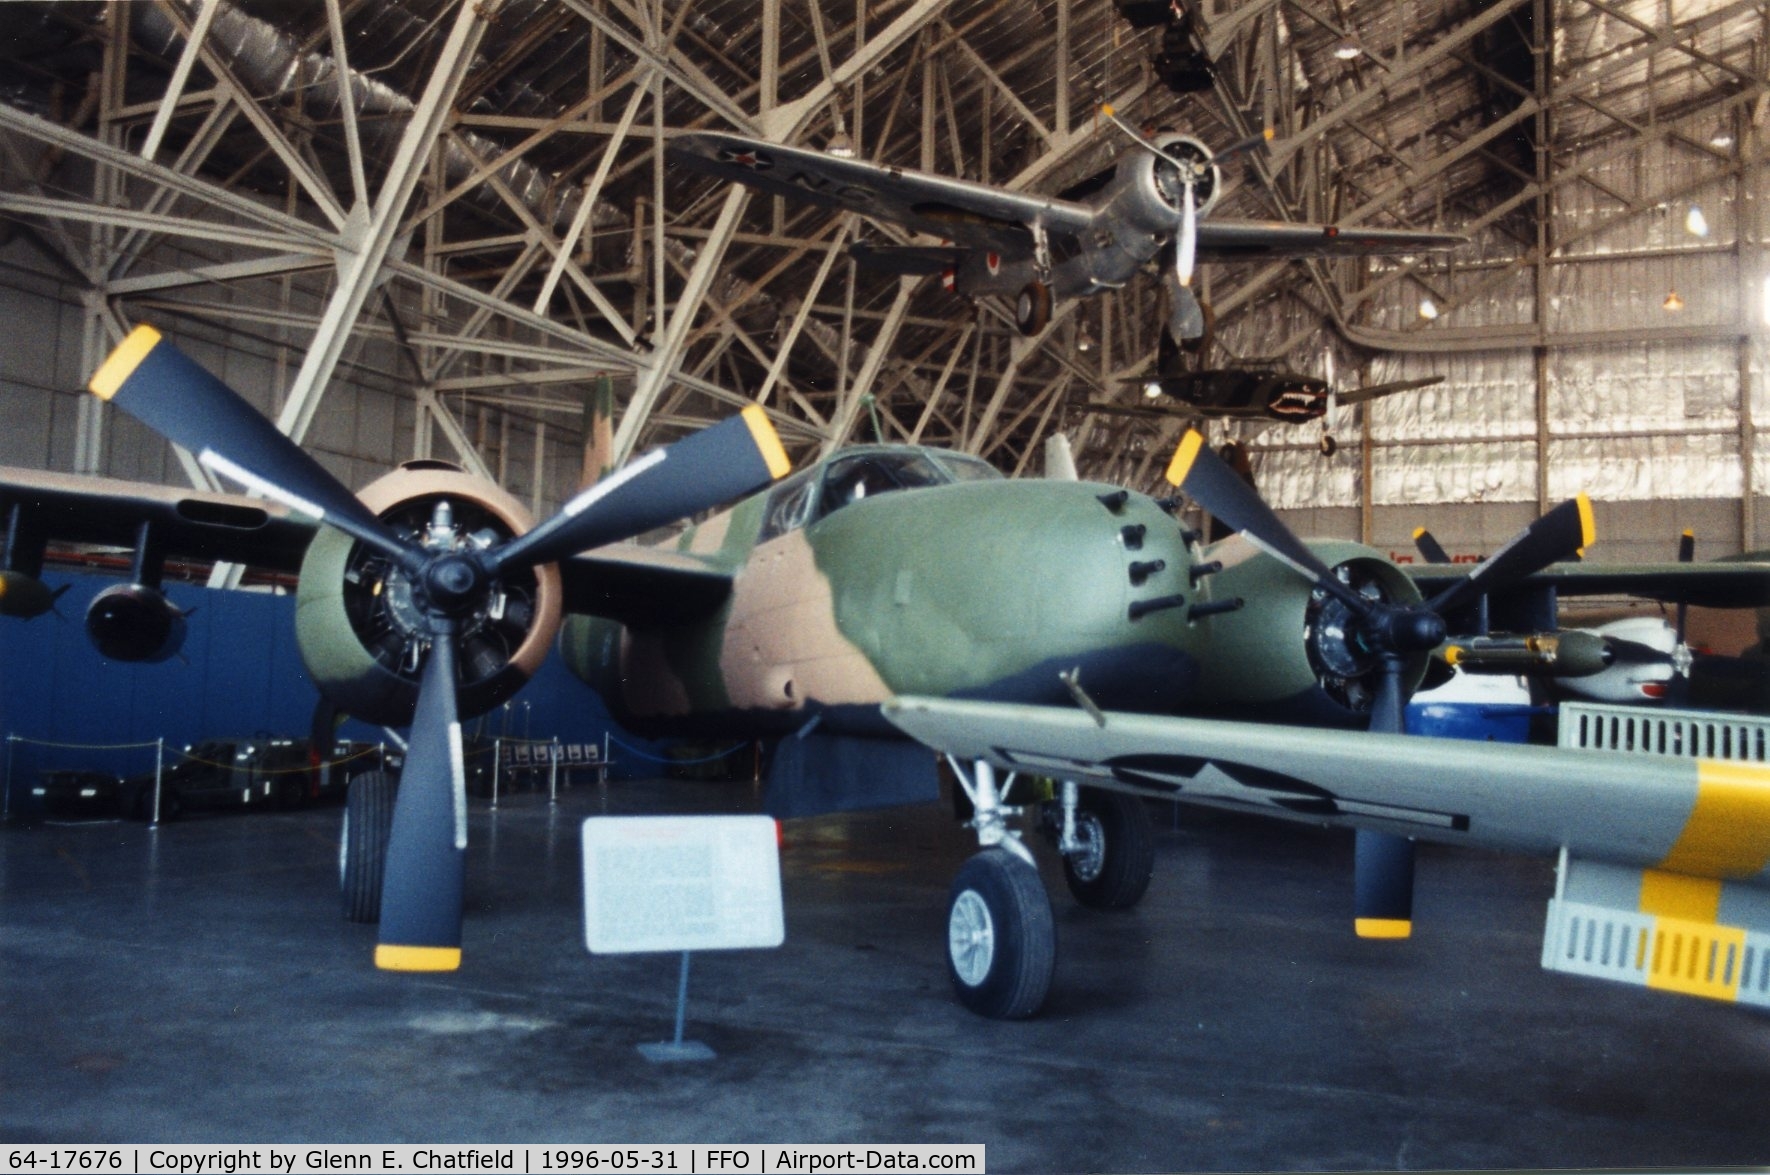 64-17676, 1971 Douglas-On Mark B-26K Counter Invader C/N 7309 (was 41-39596), At the National Museum of the U.S. Air Force